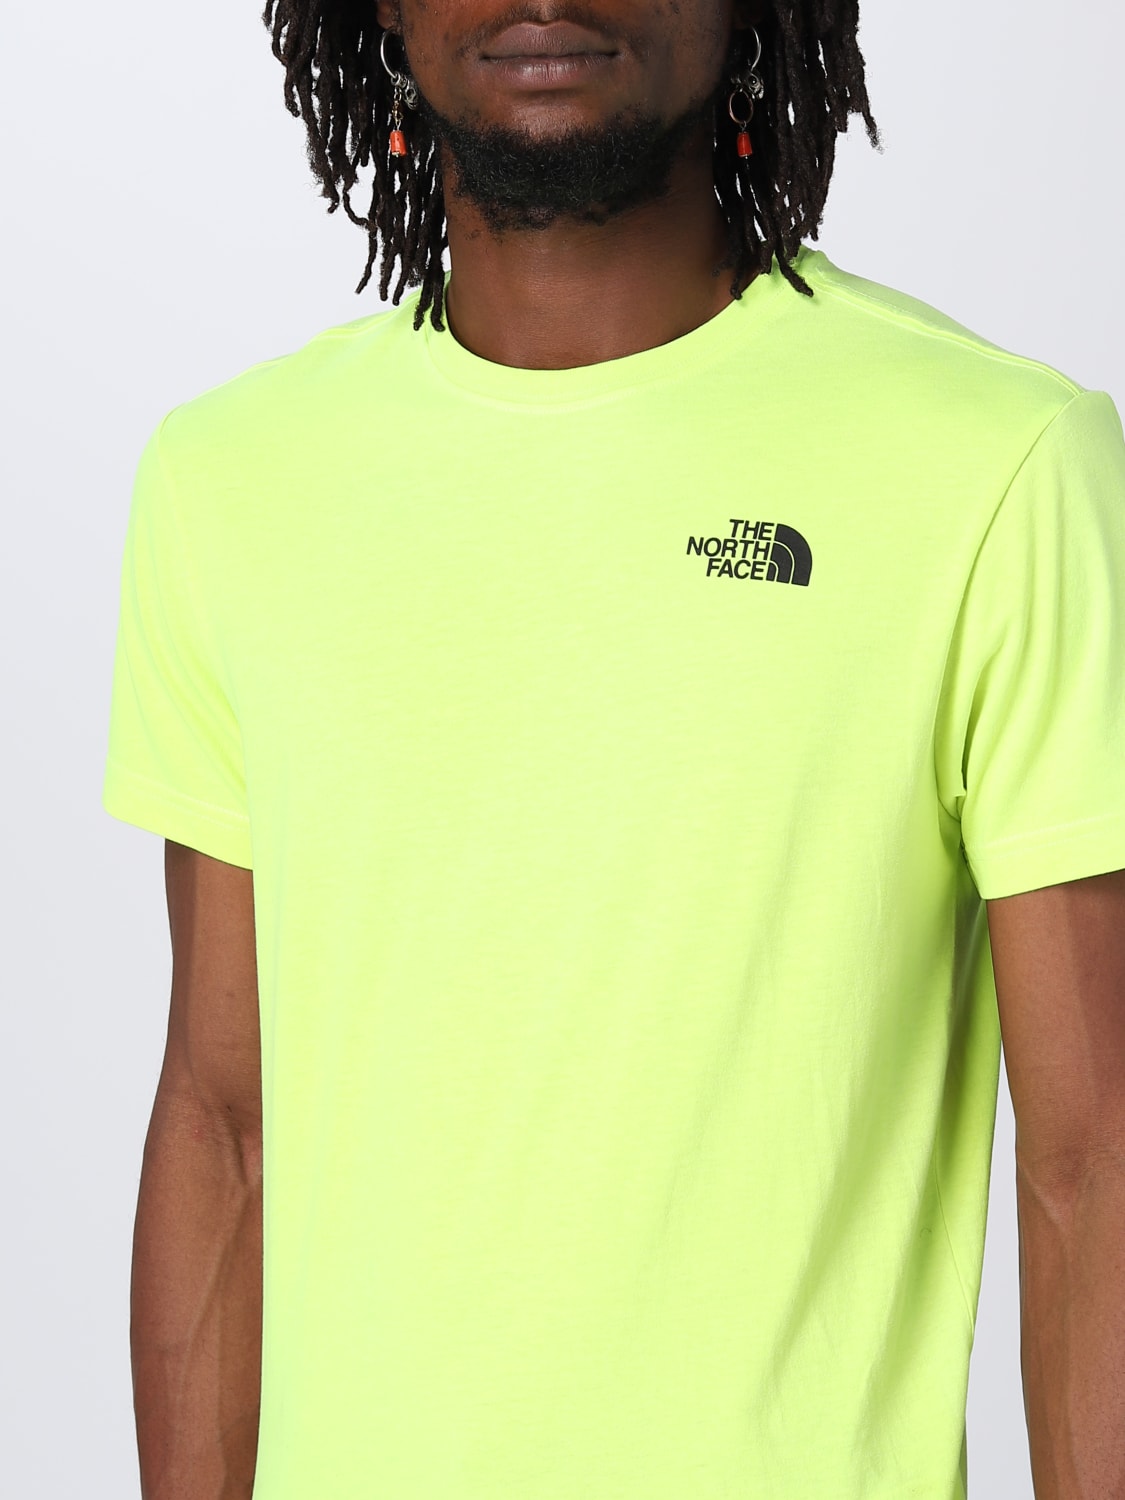 THE NORTH FACE: t-shirt for man - Green | The North Face t-shirt ...